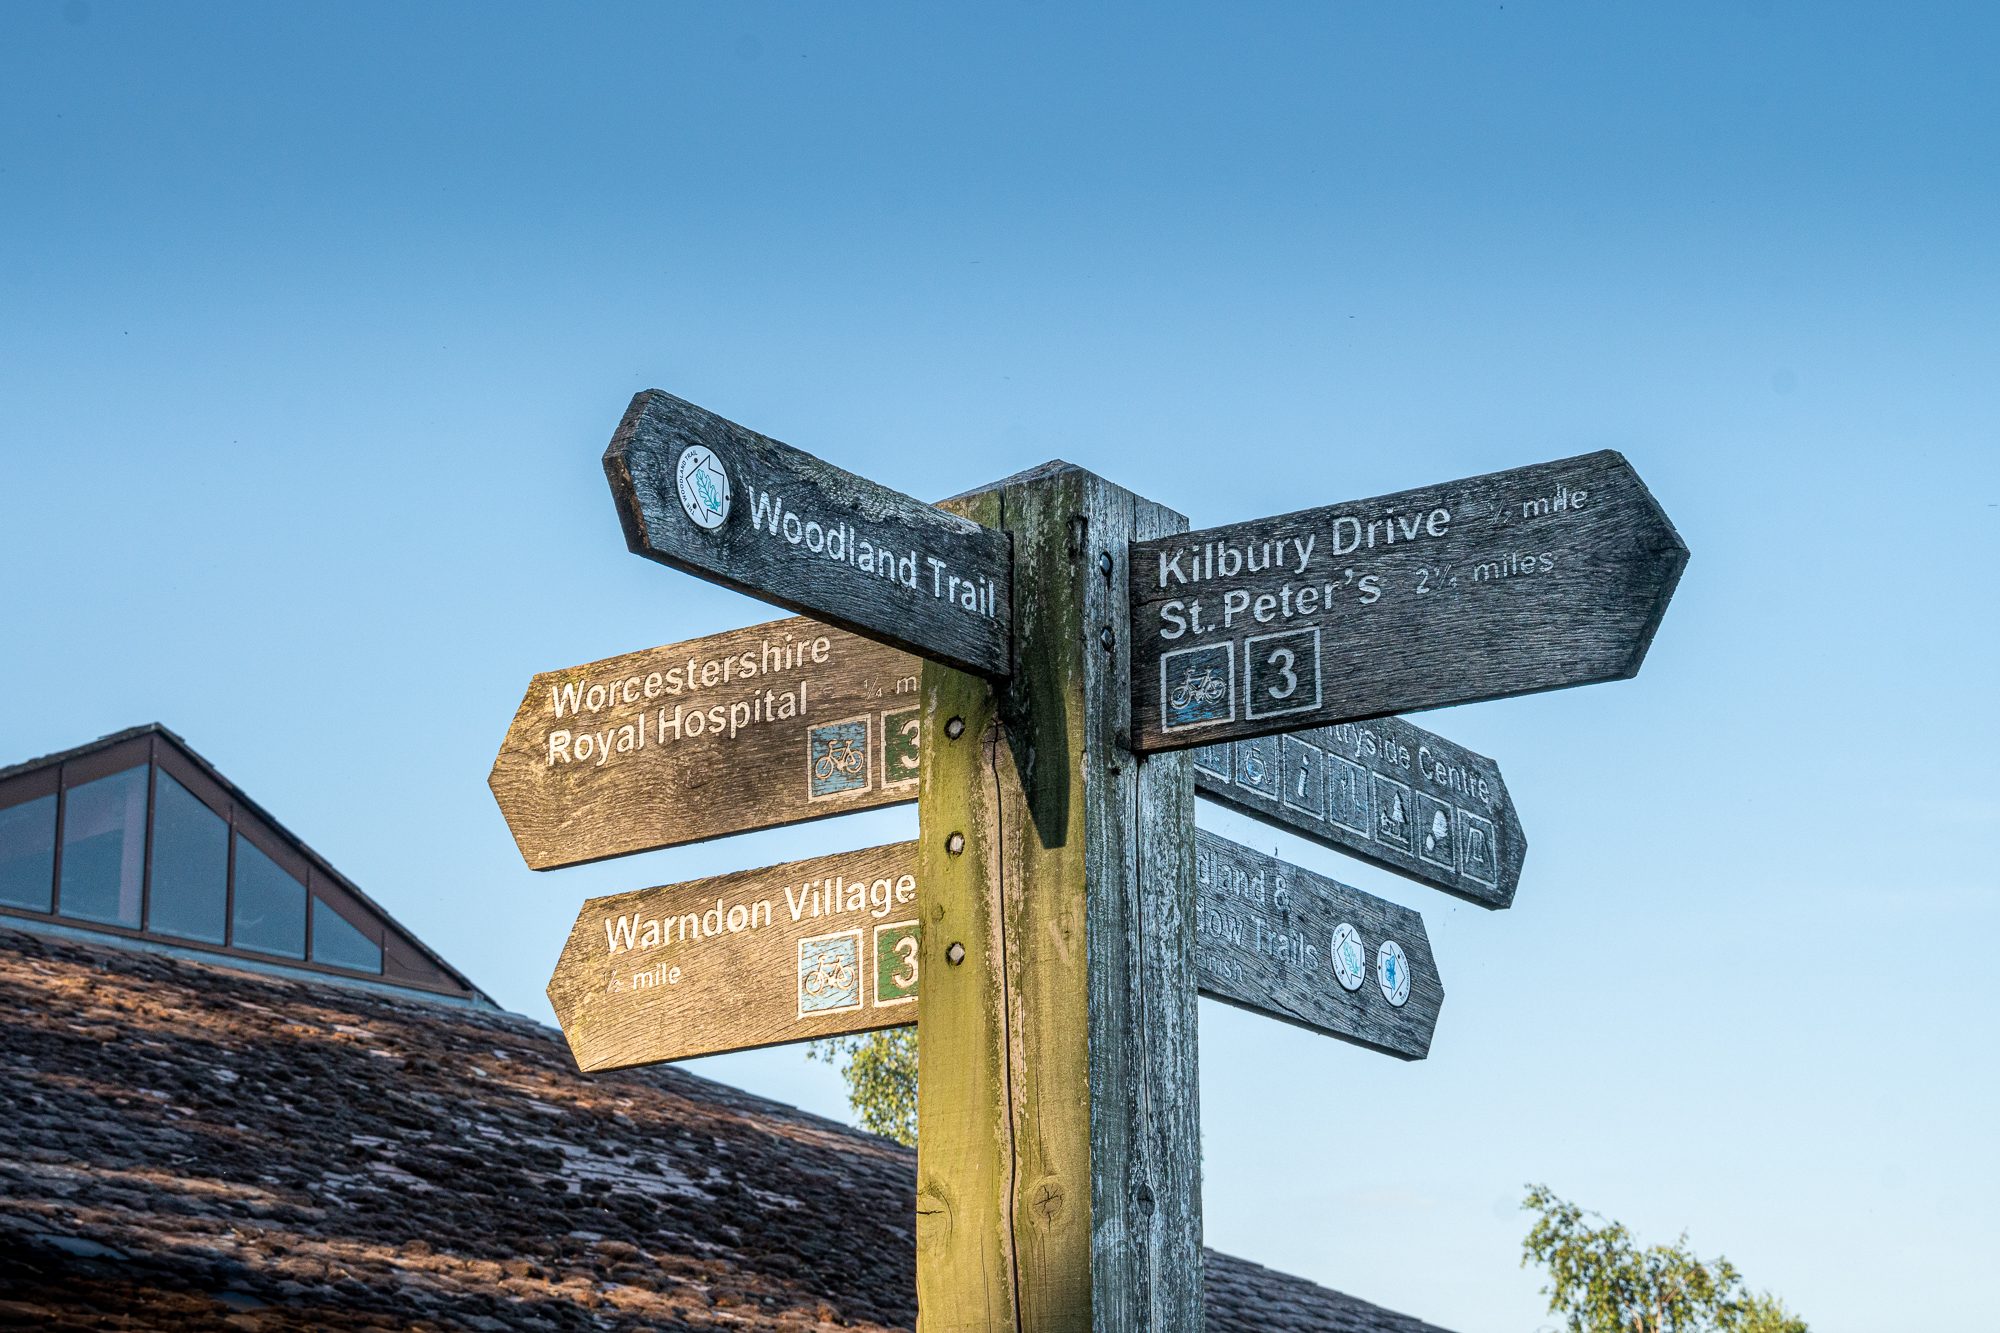 A wooden fingerpost in County Hall grounds